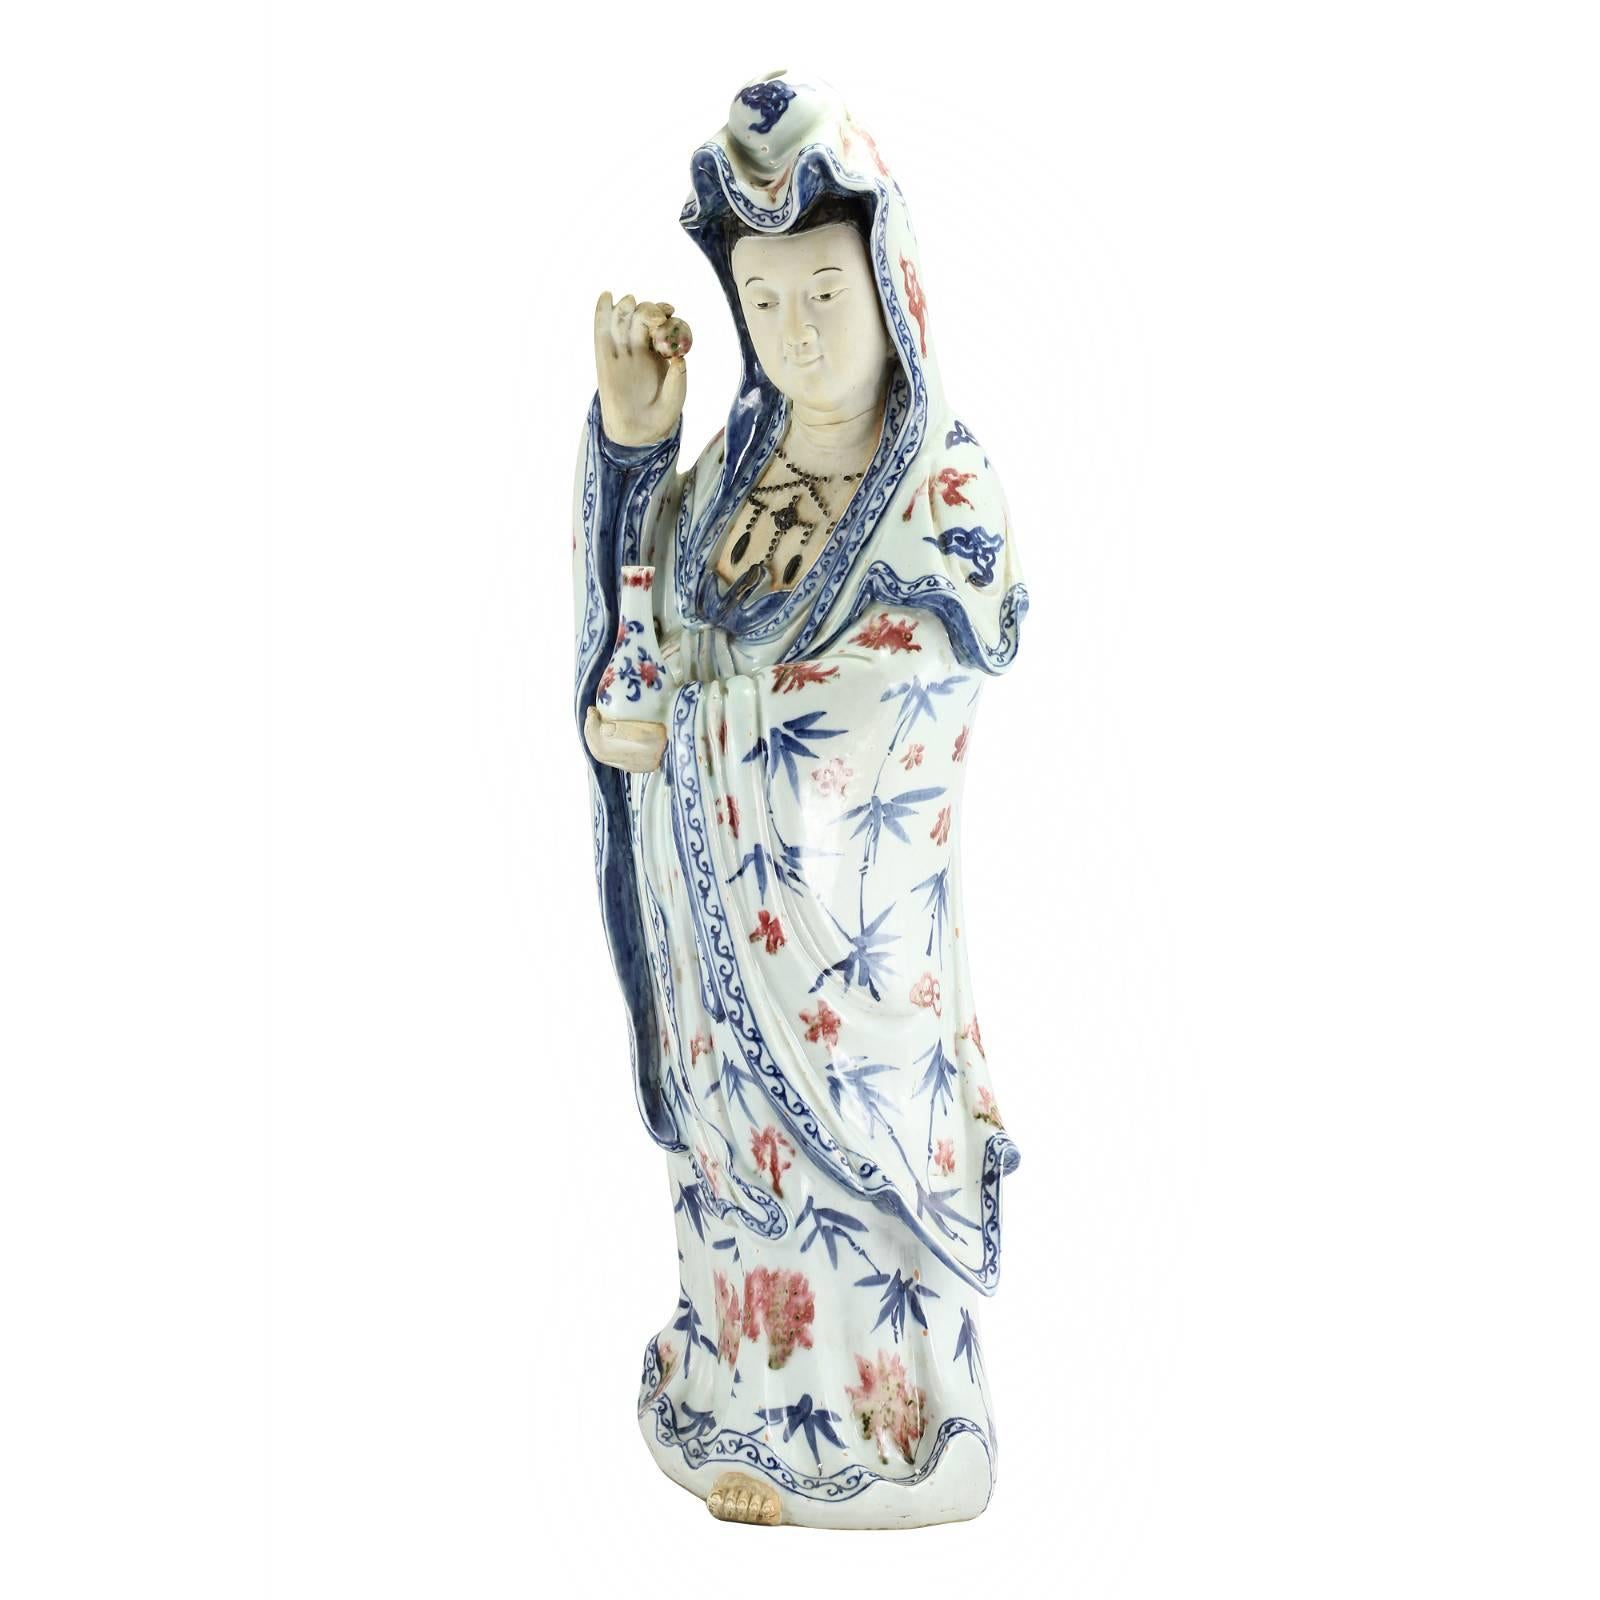 A large early 20th century Chinese porcelain figure of Guanyin. Guanyin is a bodhisattva associated with eastern Buddhism and Chinese Taoism. It is believed by some Buddhists that Guanyin places you in the heart of a lotus when you pass away, to be